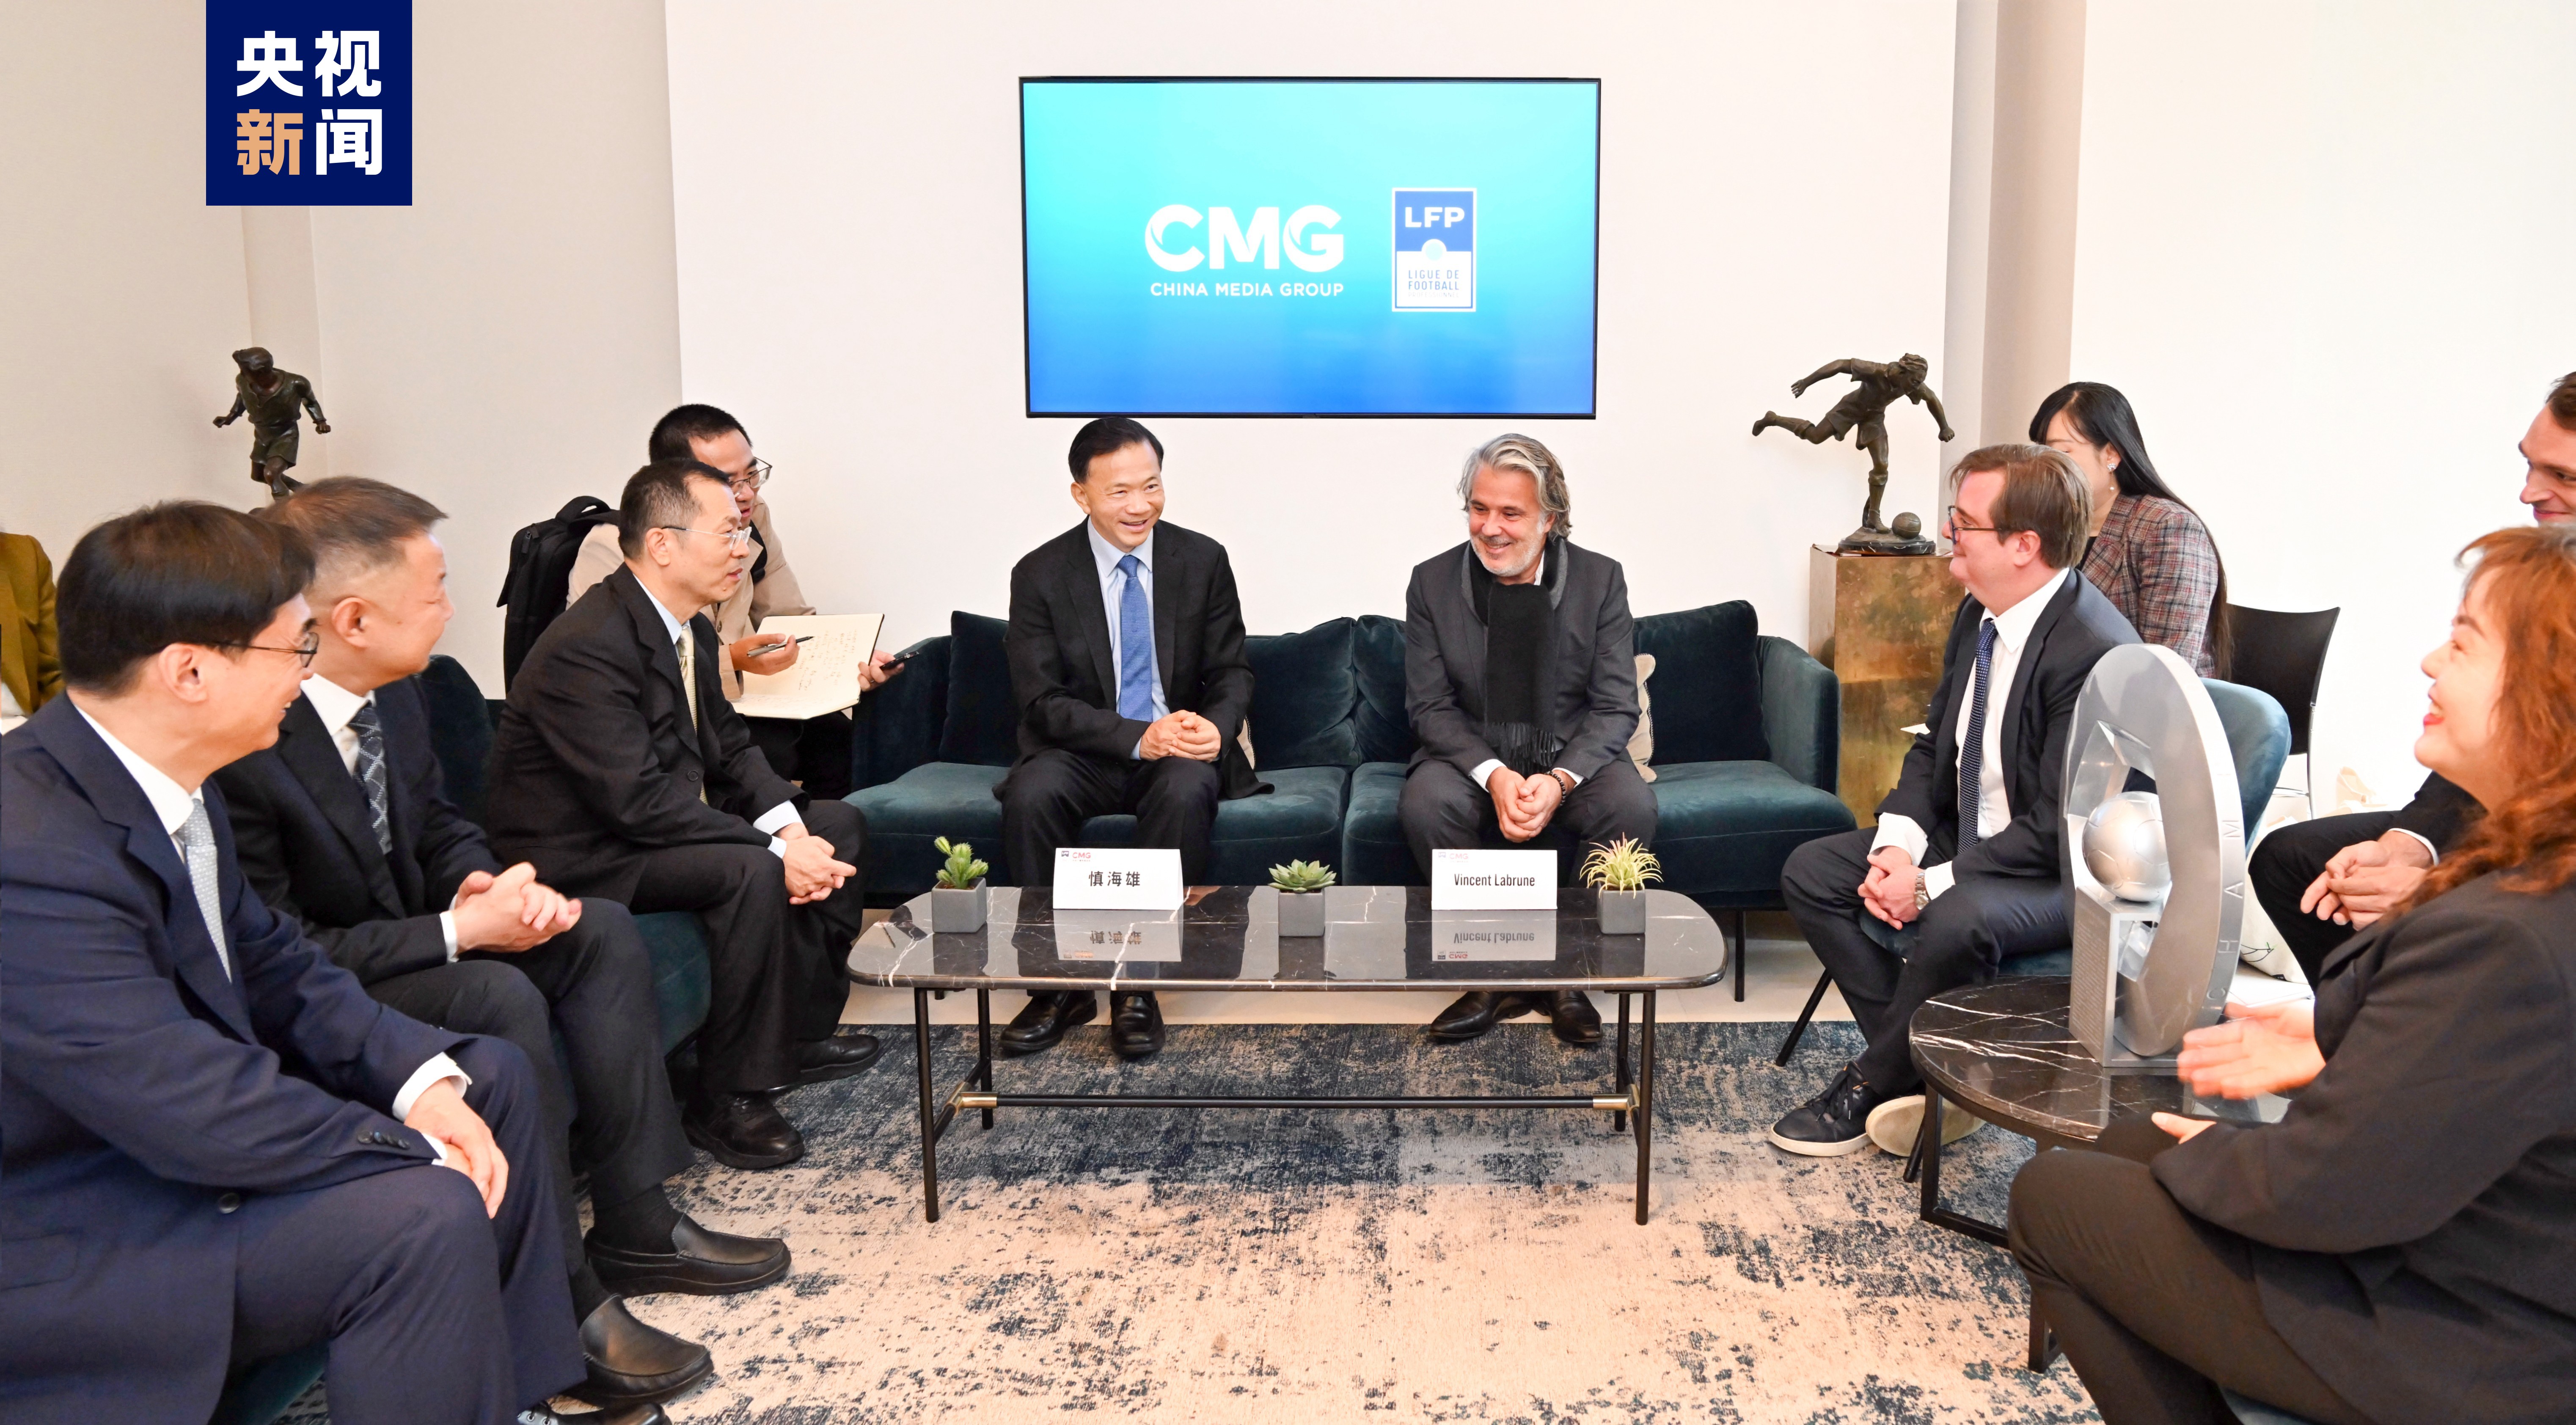 China Media Group and France's Ligue de Football Professionnel sign a memorandum of cooperation, October 23, 2023. /CMG